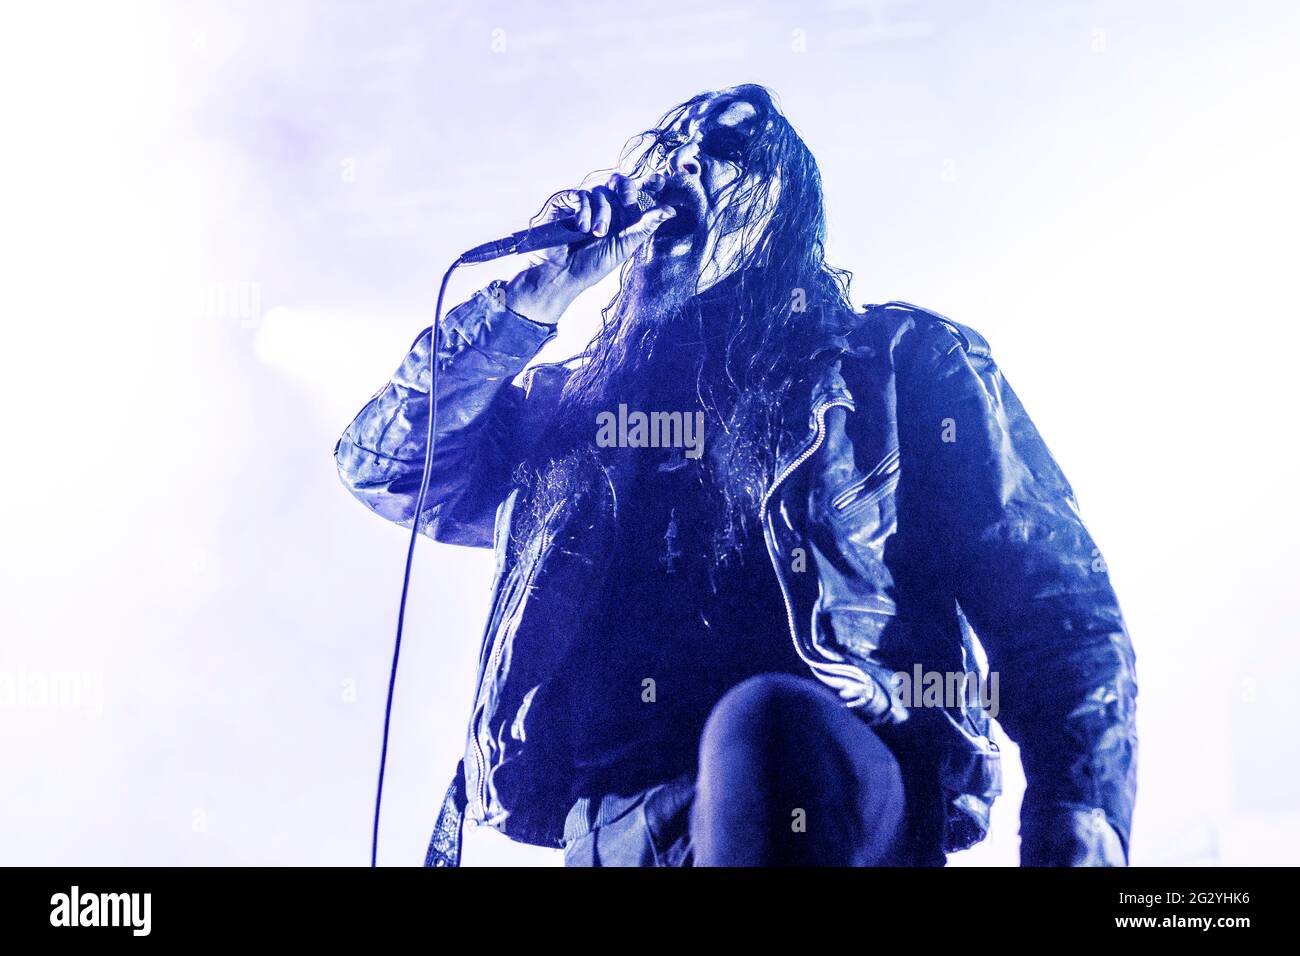 Oslo, Norway. 12th June, 2021. The Norwegian black metal band Gaahls Wyrd performs a live concert at Sentrum Scene in Oslo. Here vocalist Gaahl is seen live on stage. (Photo Credit: Gonzales Photo/Alamy Live News Stock Photo